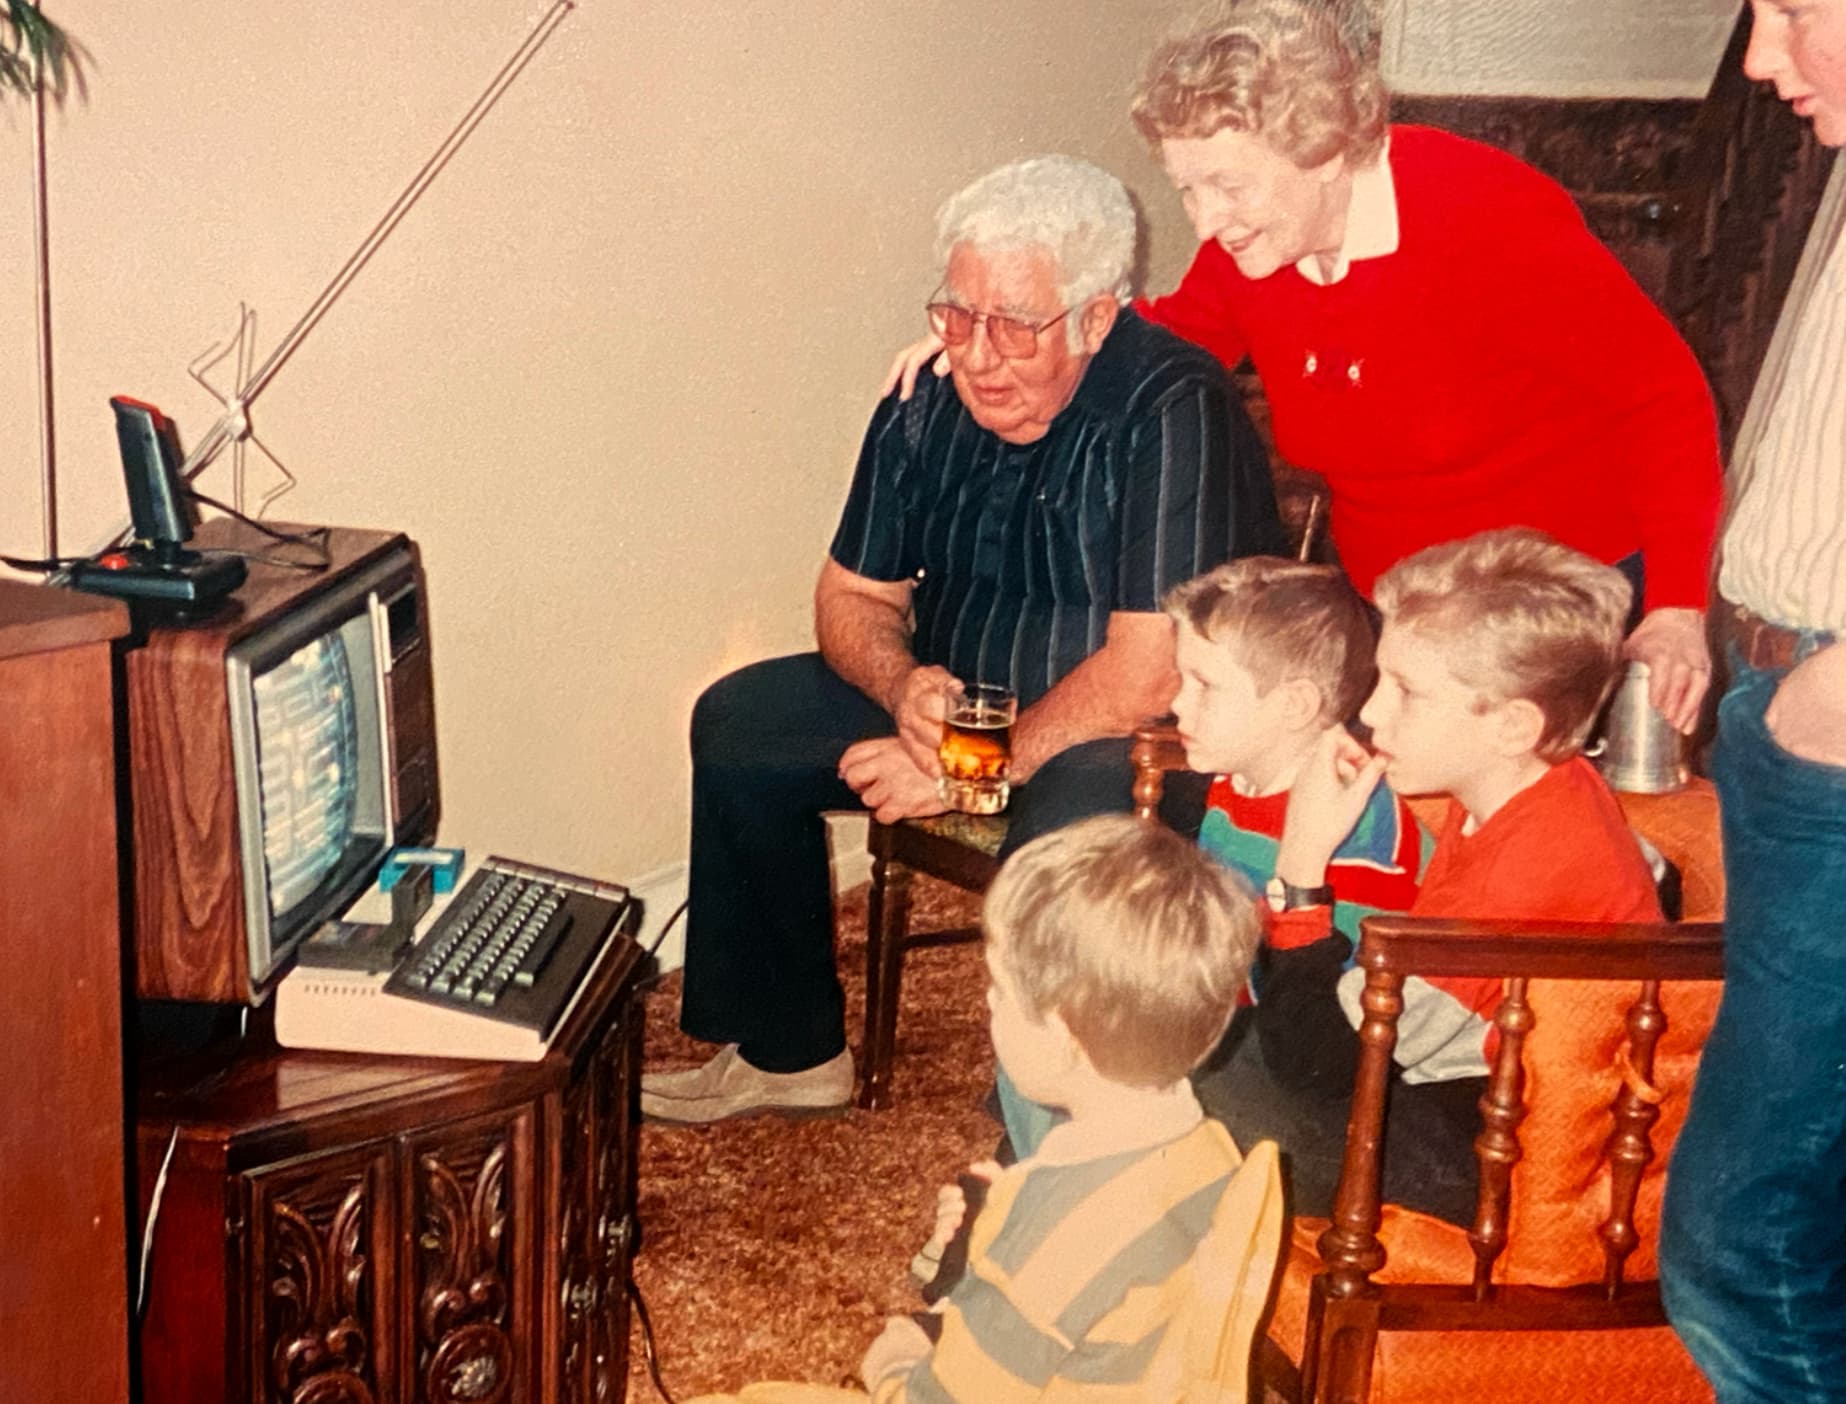 “Showing off my PAC-MAN skills to my cousins and grandparents, 1987.”